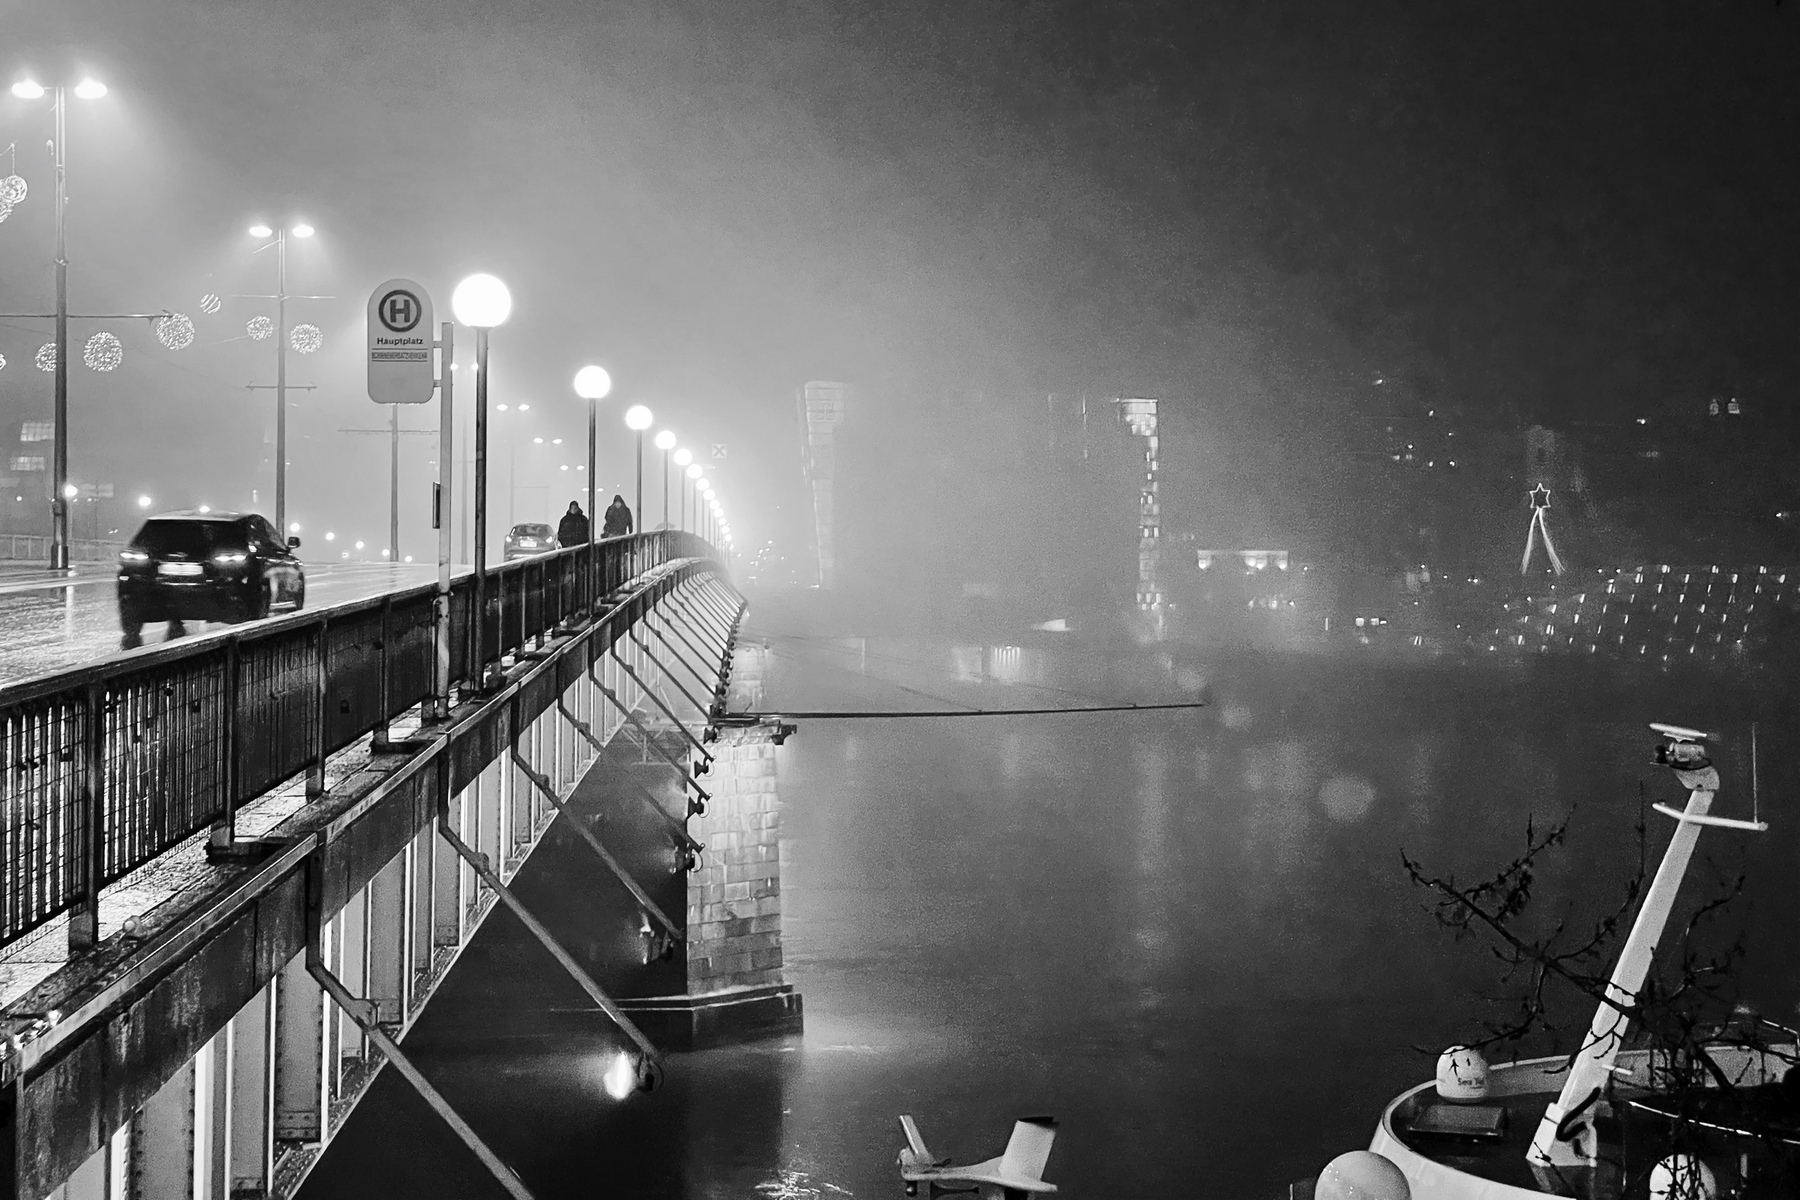 Black and white photo, a bridge with a car on it in the left side, the right shows the Danube at night and an illuminated building in the background; it is foggy